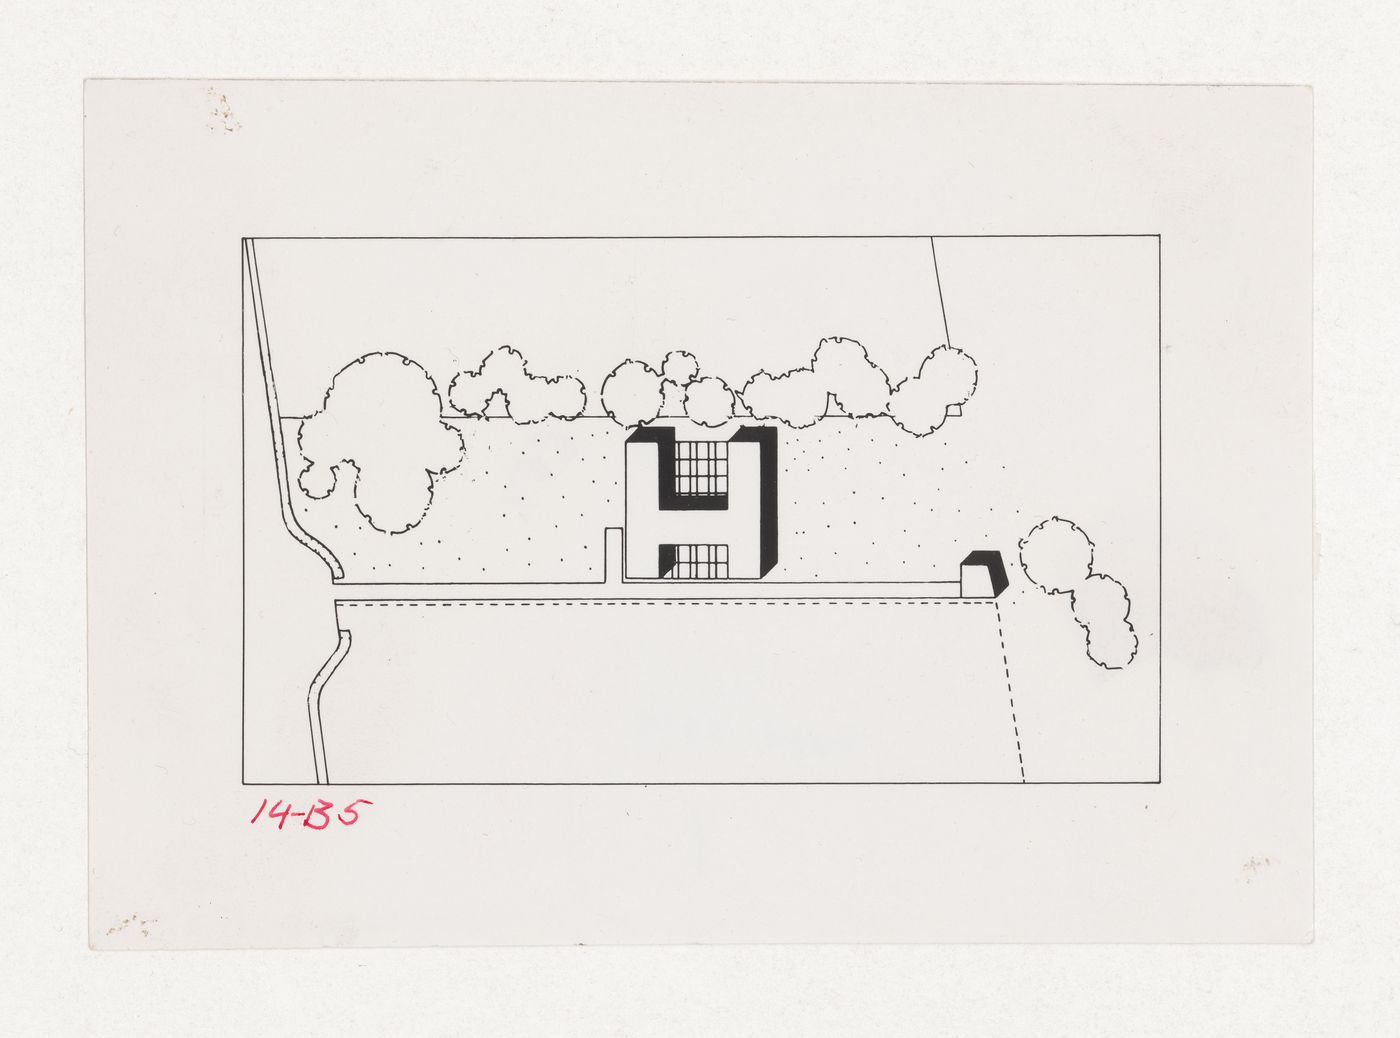 Photograph of a site plan for House near Cowes, Isle of Wight, England